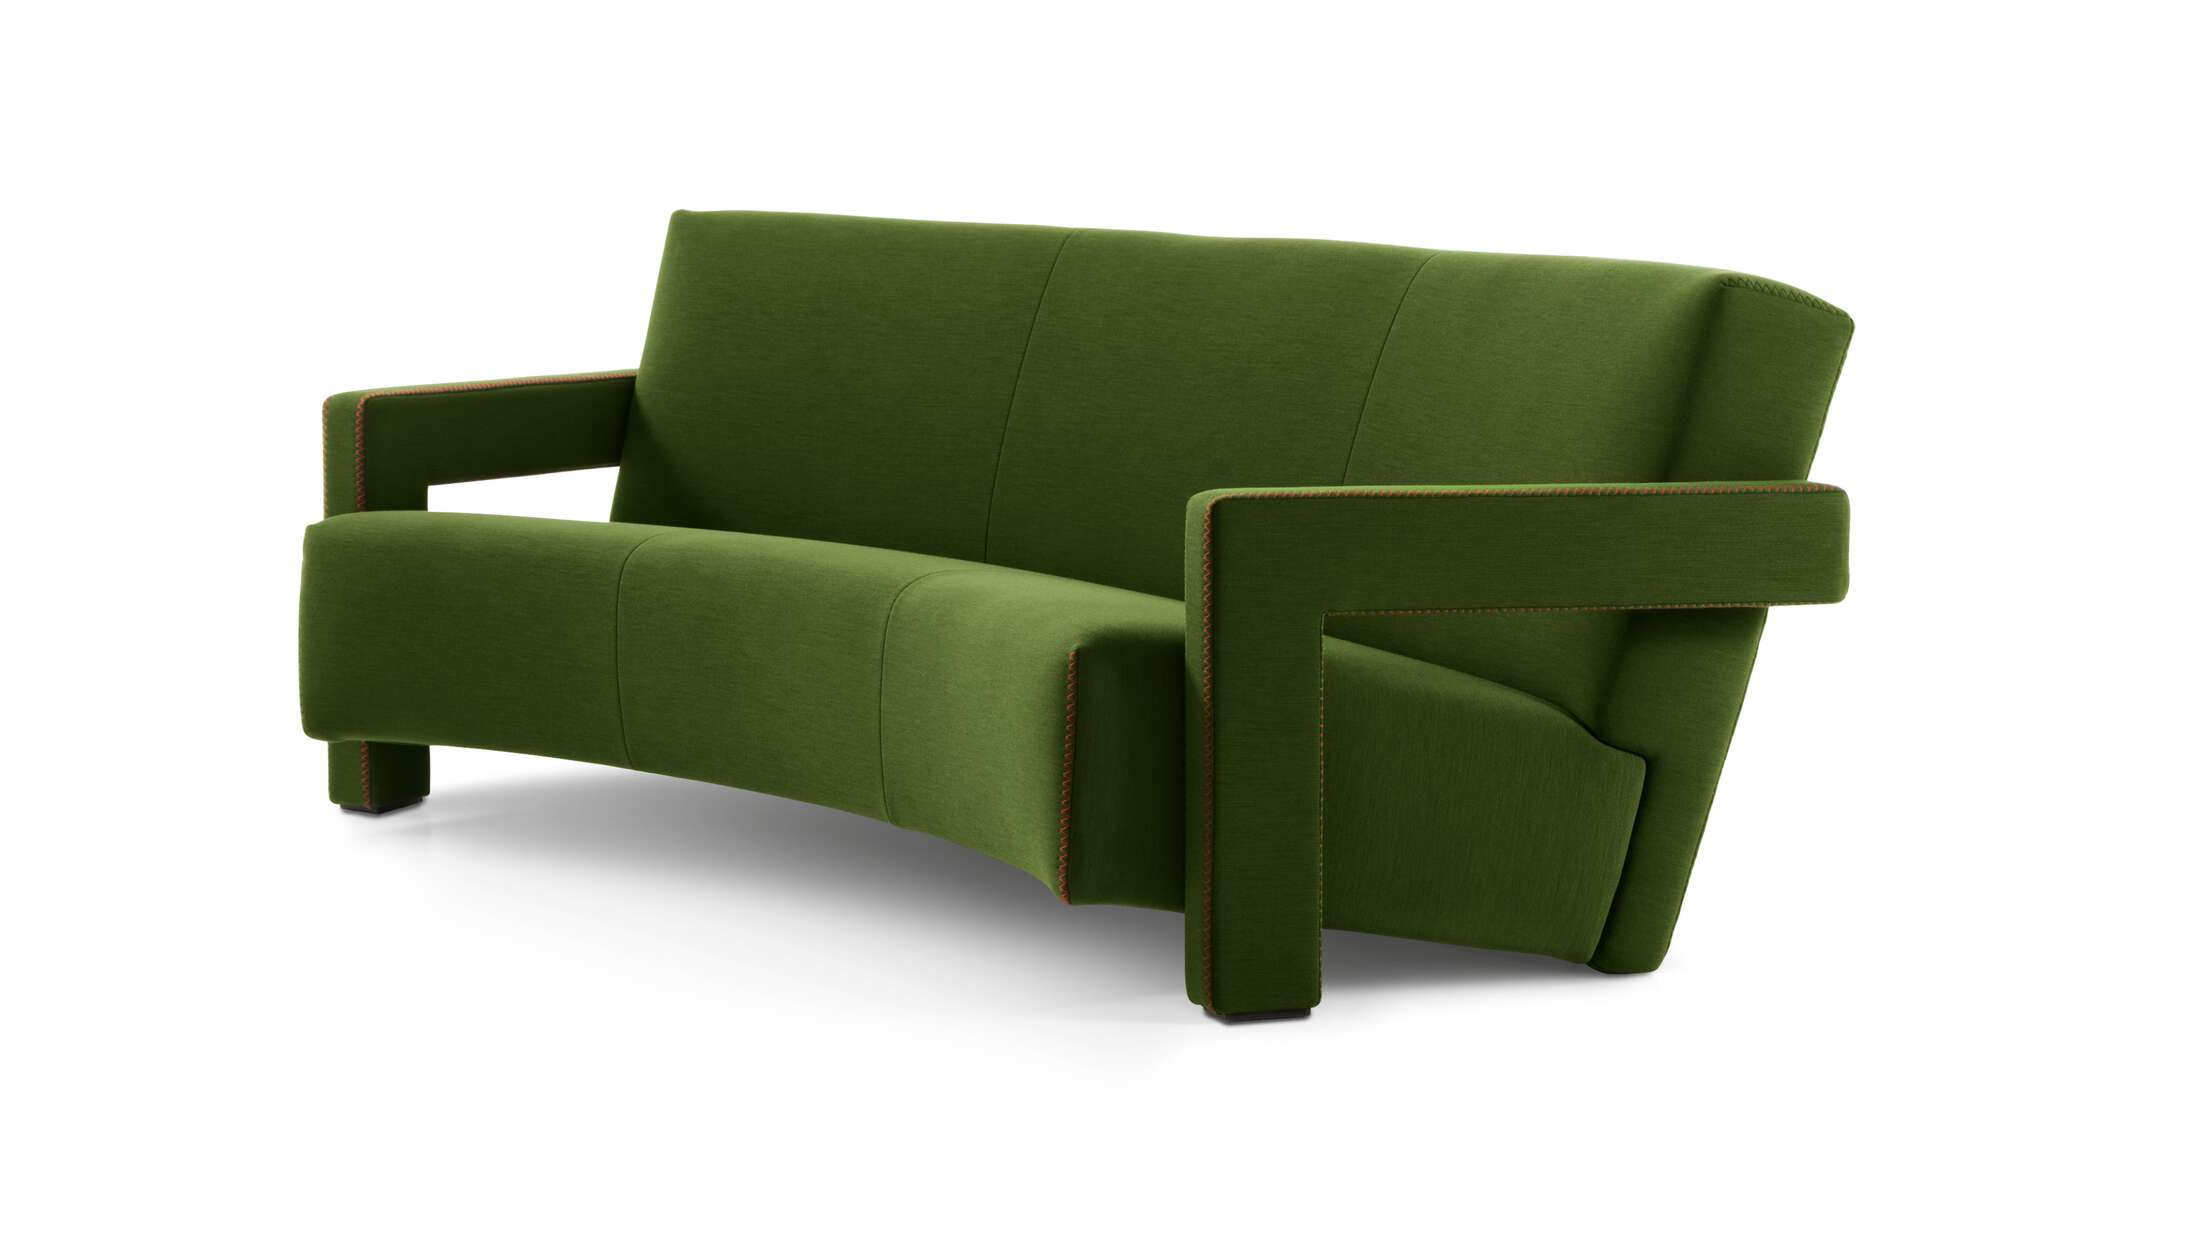 Sofa designed by Gerrit Thomas Rietveld in 1935. Relaunched in 1988. Manufactured by Cassina in Italy. The price given applies to the sofa as shown in the first picture. Please ask for pricing in other sizes and colors. 